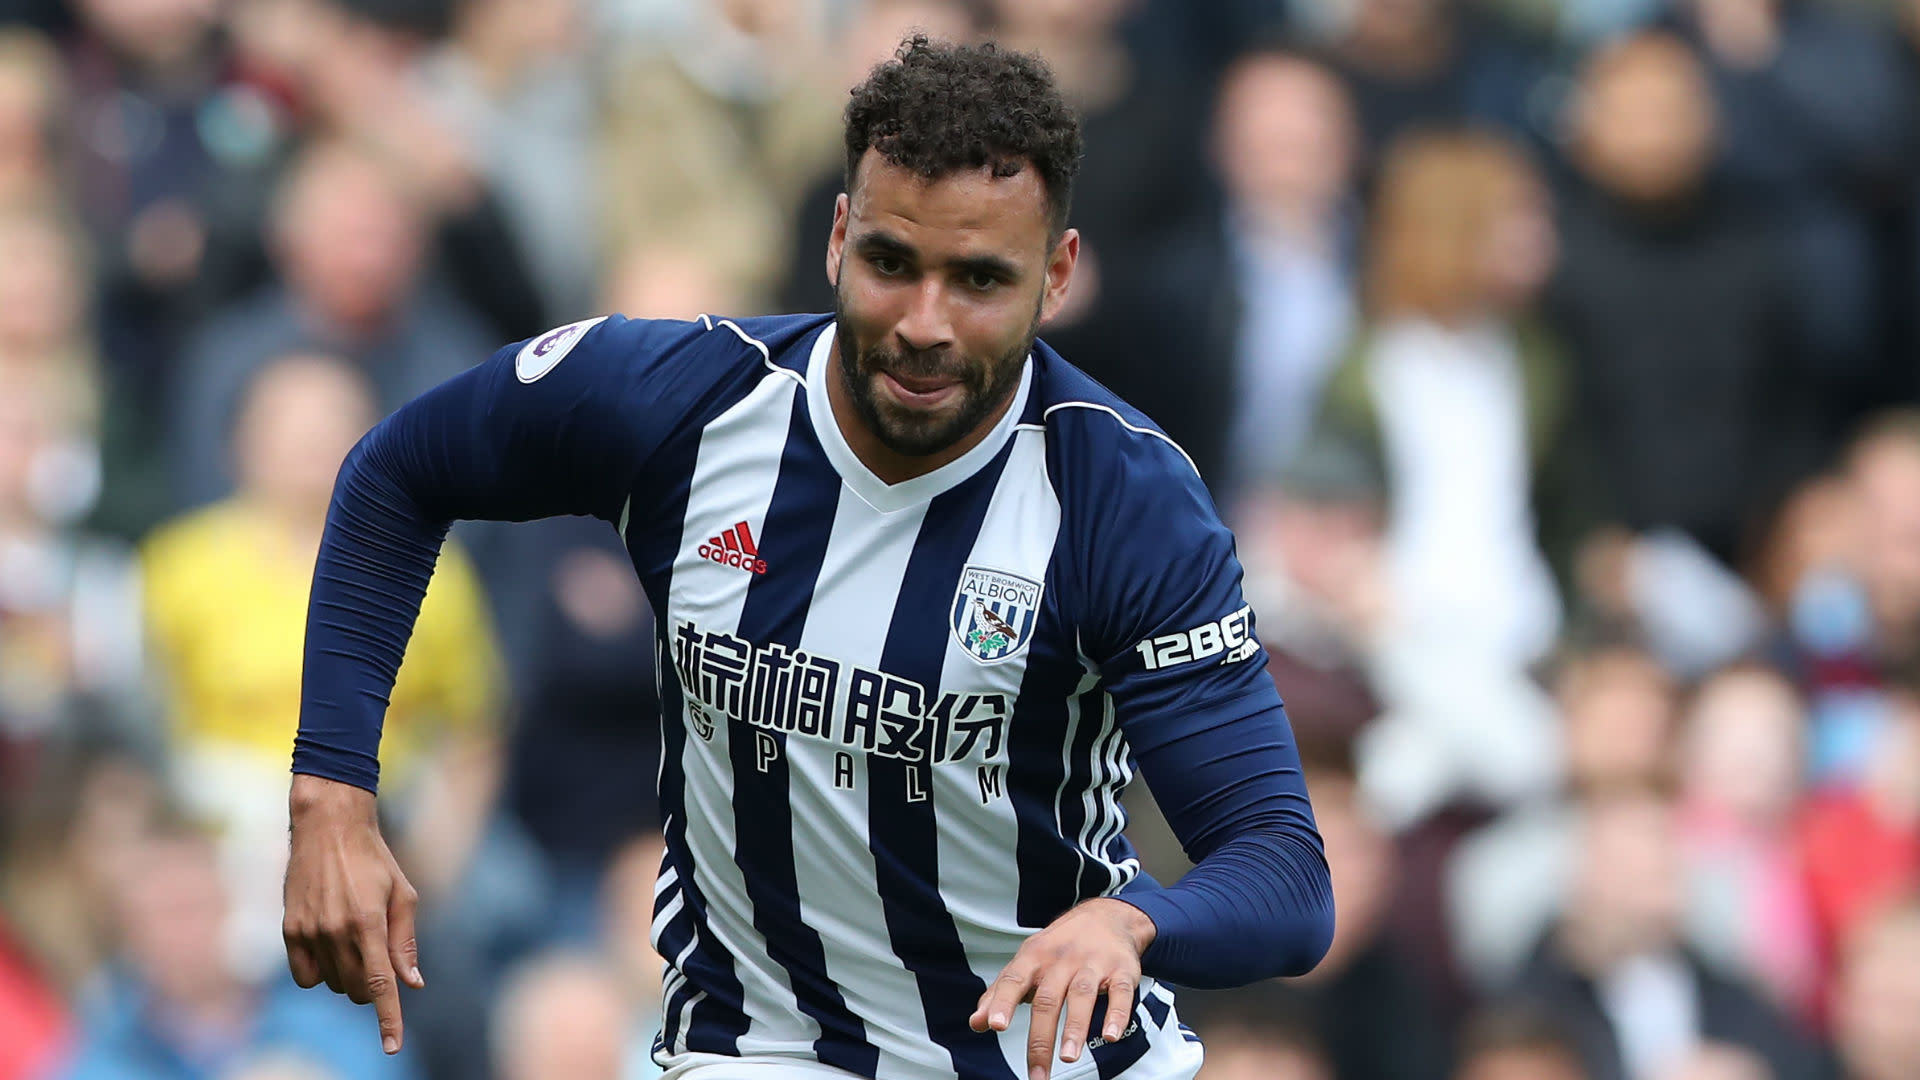 West Brom S Robson Kanu Loses Red Card Appeal